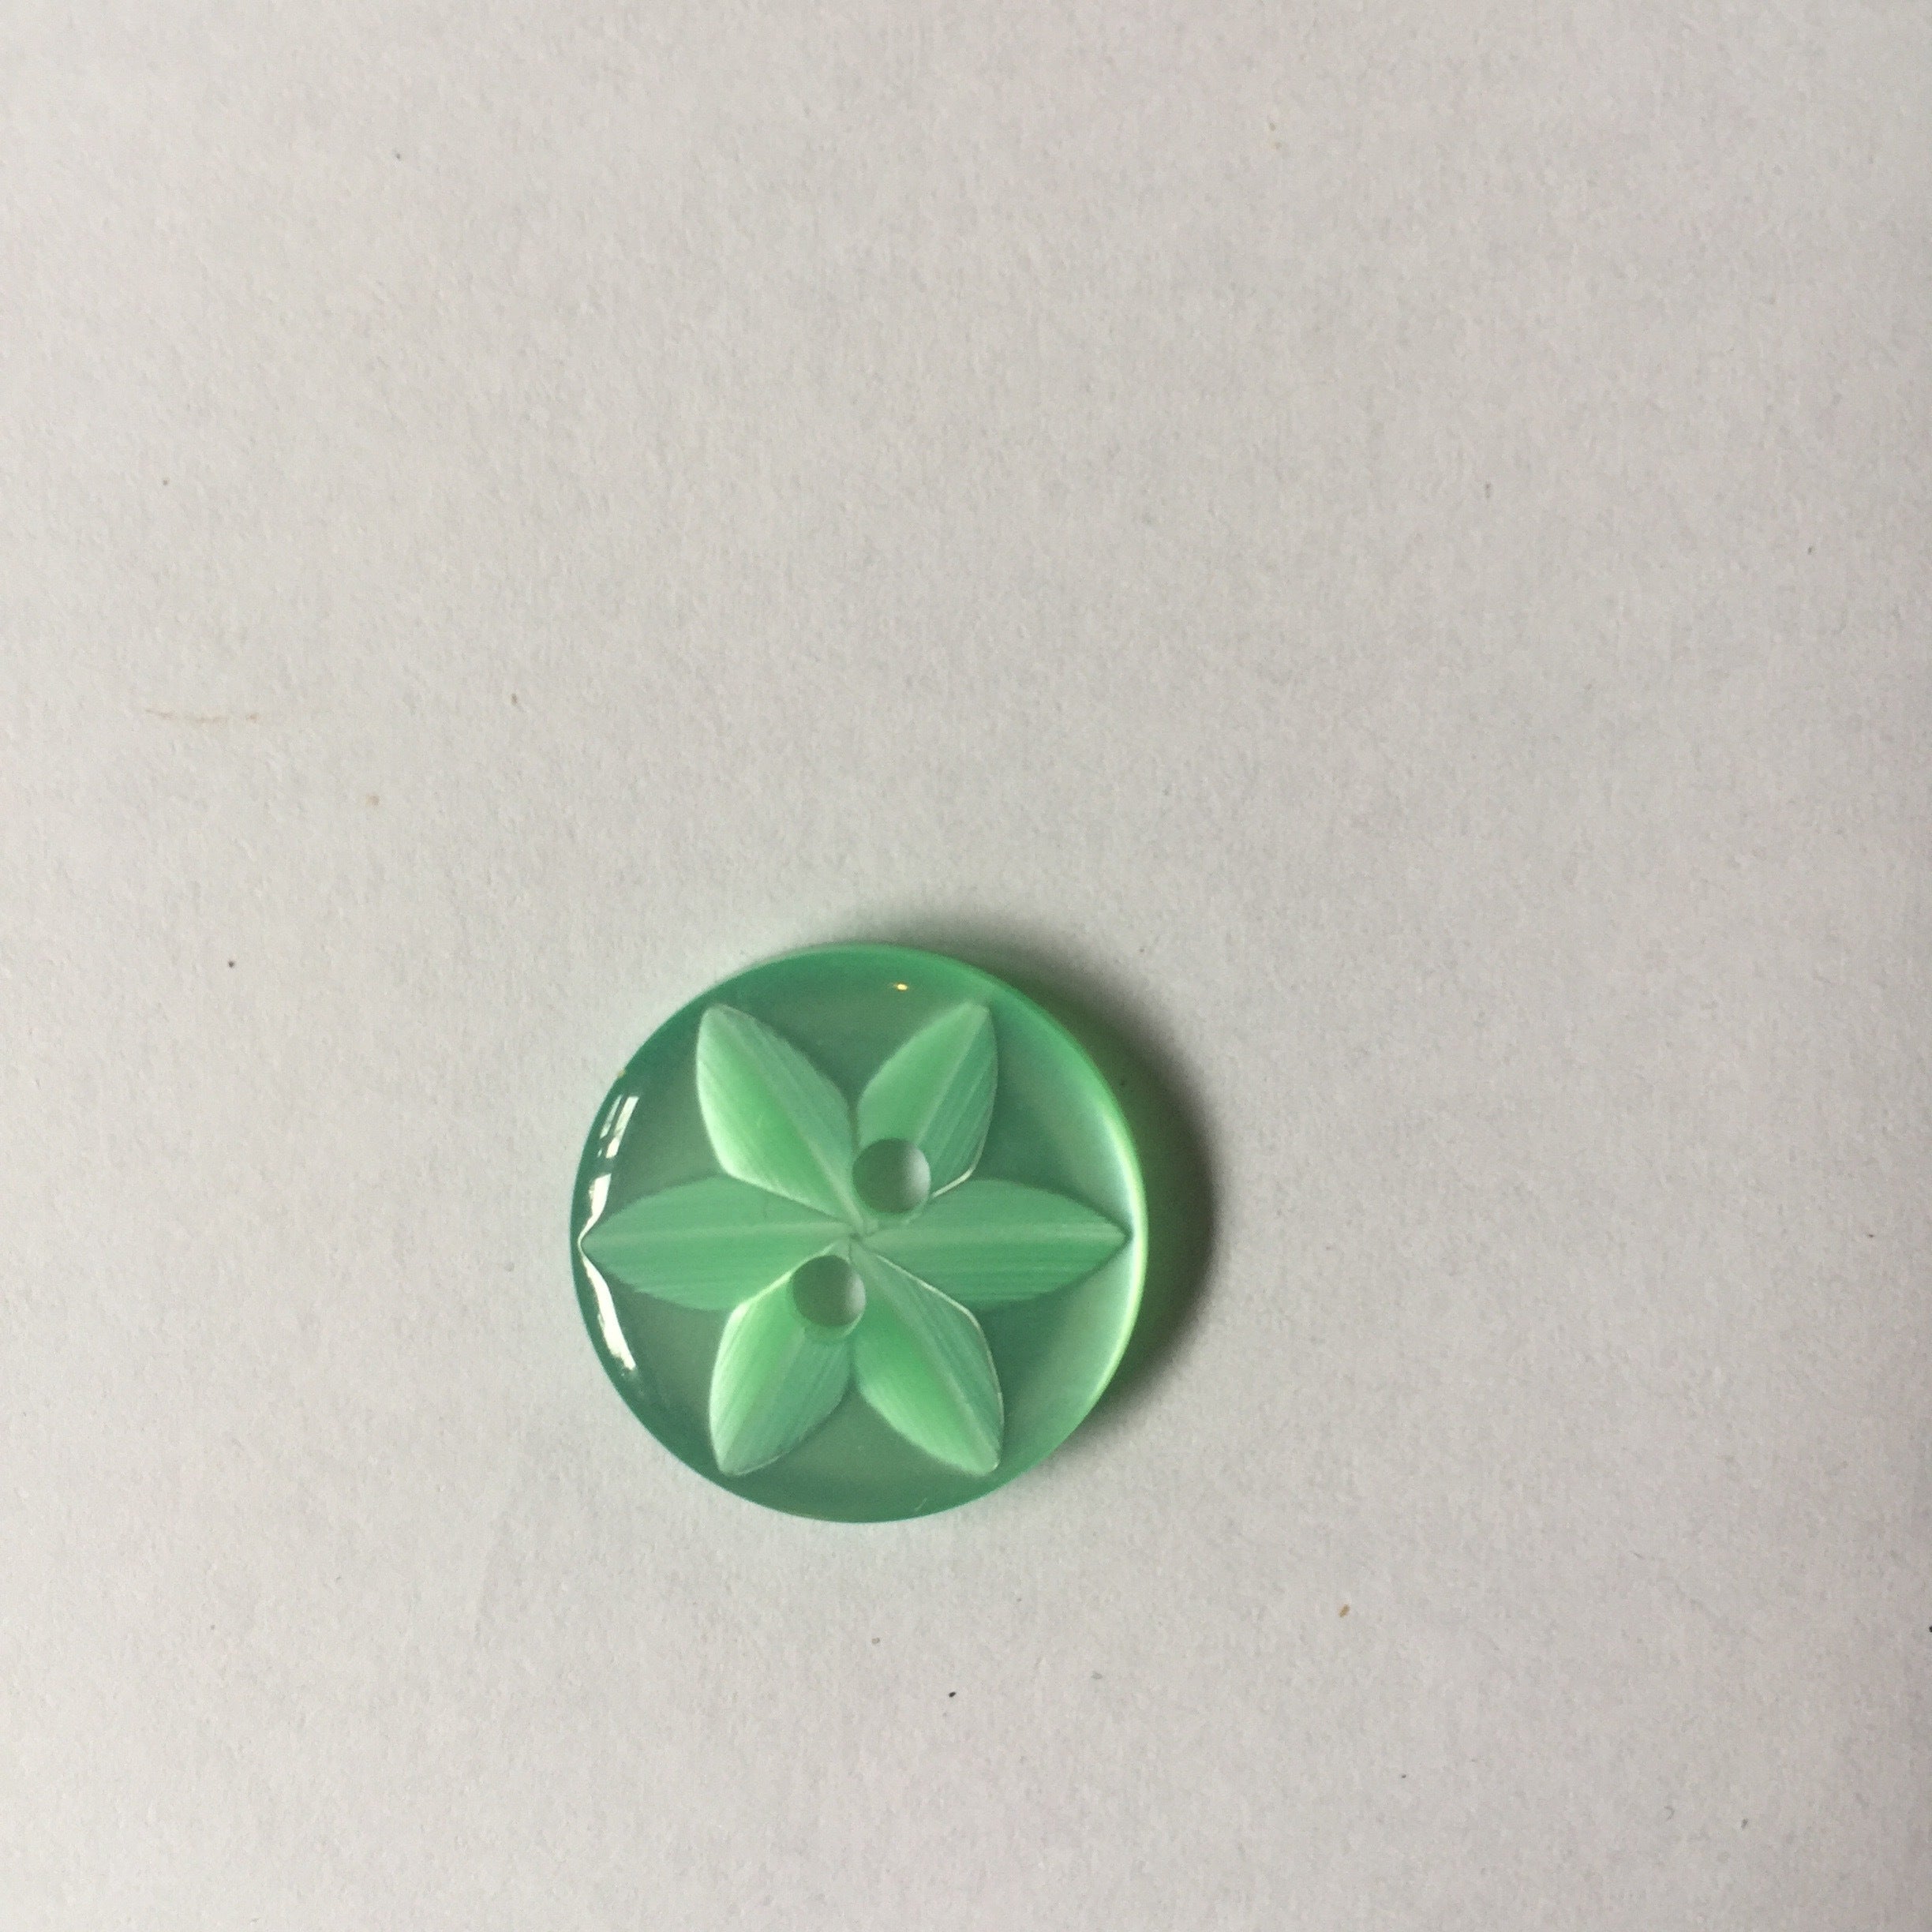 Large Star buttons - 16mm